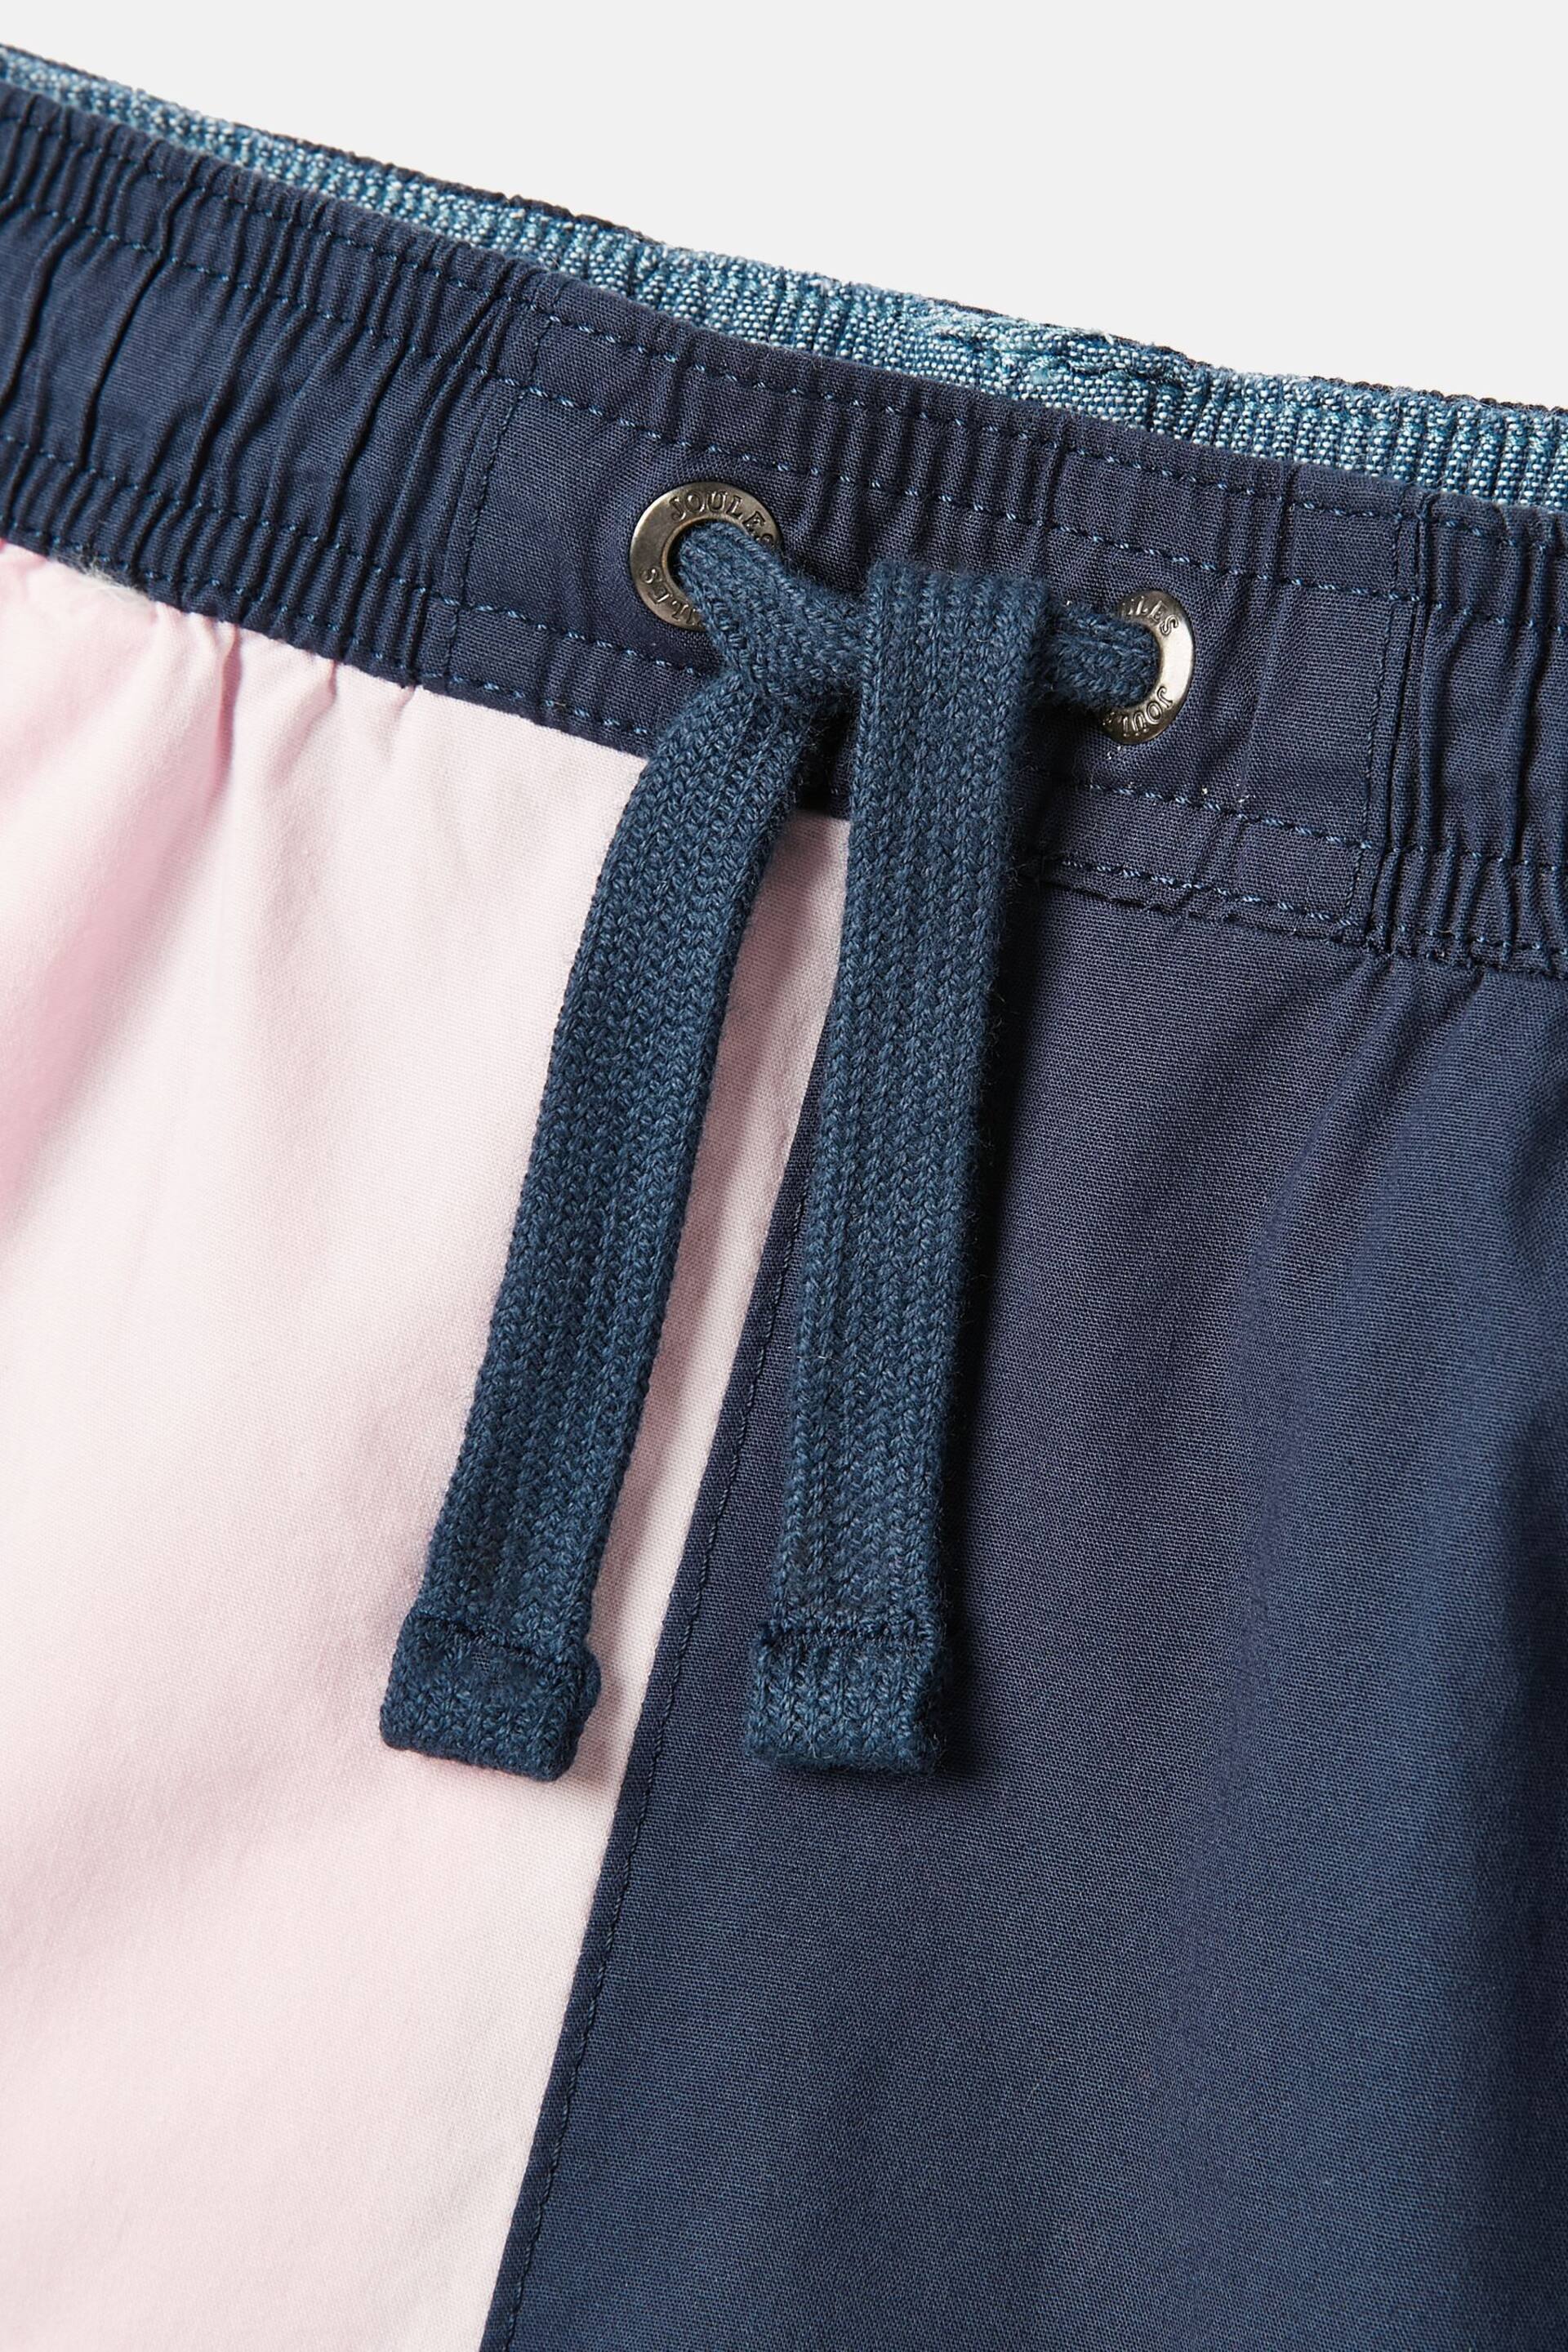 Joules Quayside Navy & Pink Elastic Waist Chino Shorts - Image 3 of 5